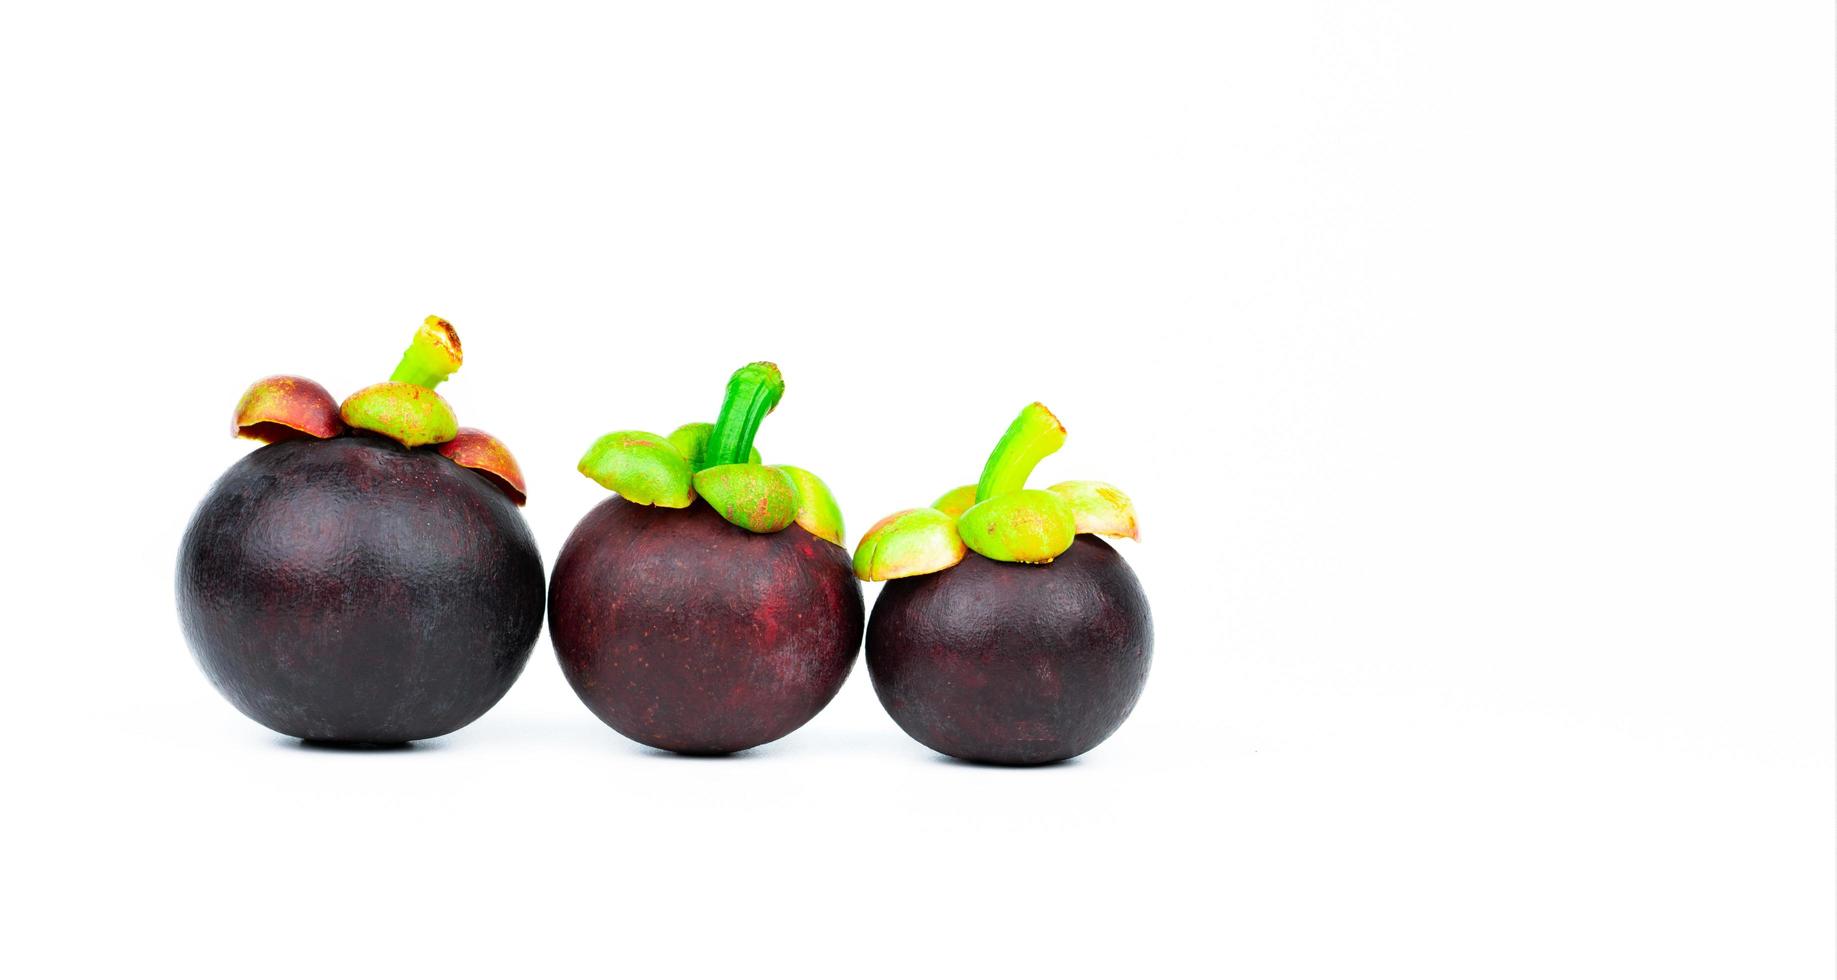 Whole mangosteen showing purple skin isolated on white background with space. Tropical fruit from Thailand. The queen of fruits. Asia fresh fruit market concept. Natural source of tannin and xanthones photo